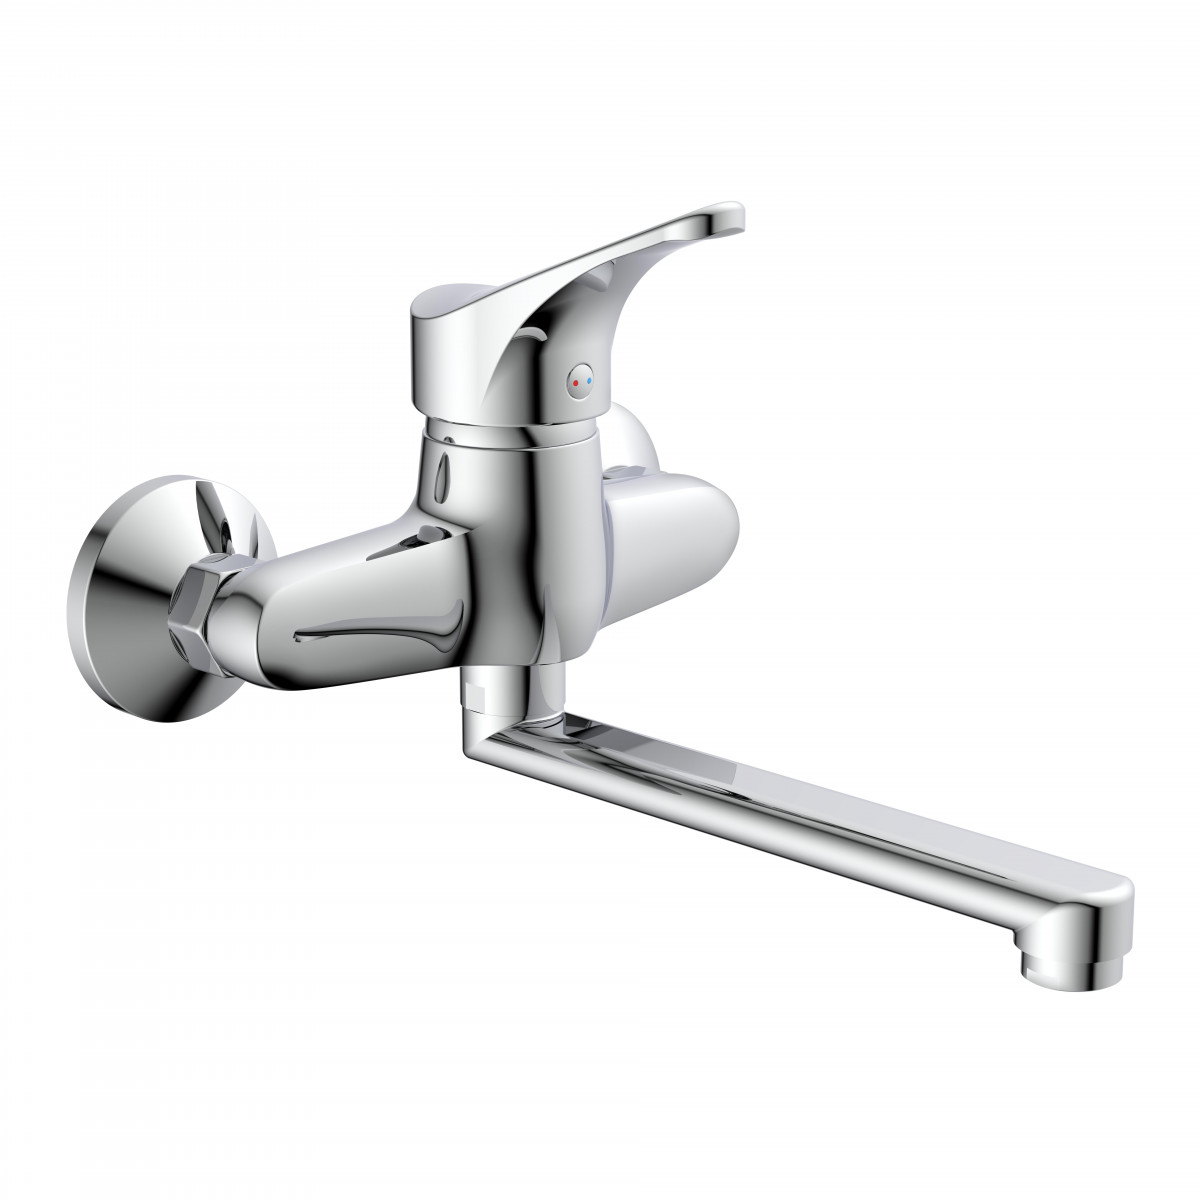 ATTICA Sink mixer, chrome, for wall fixing